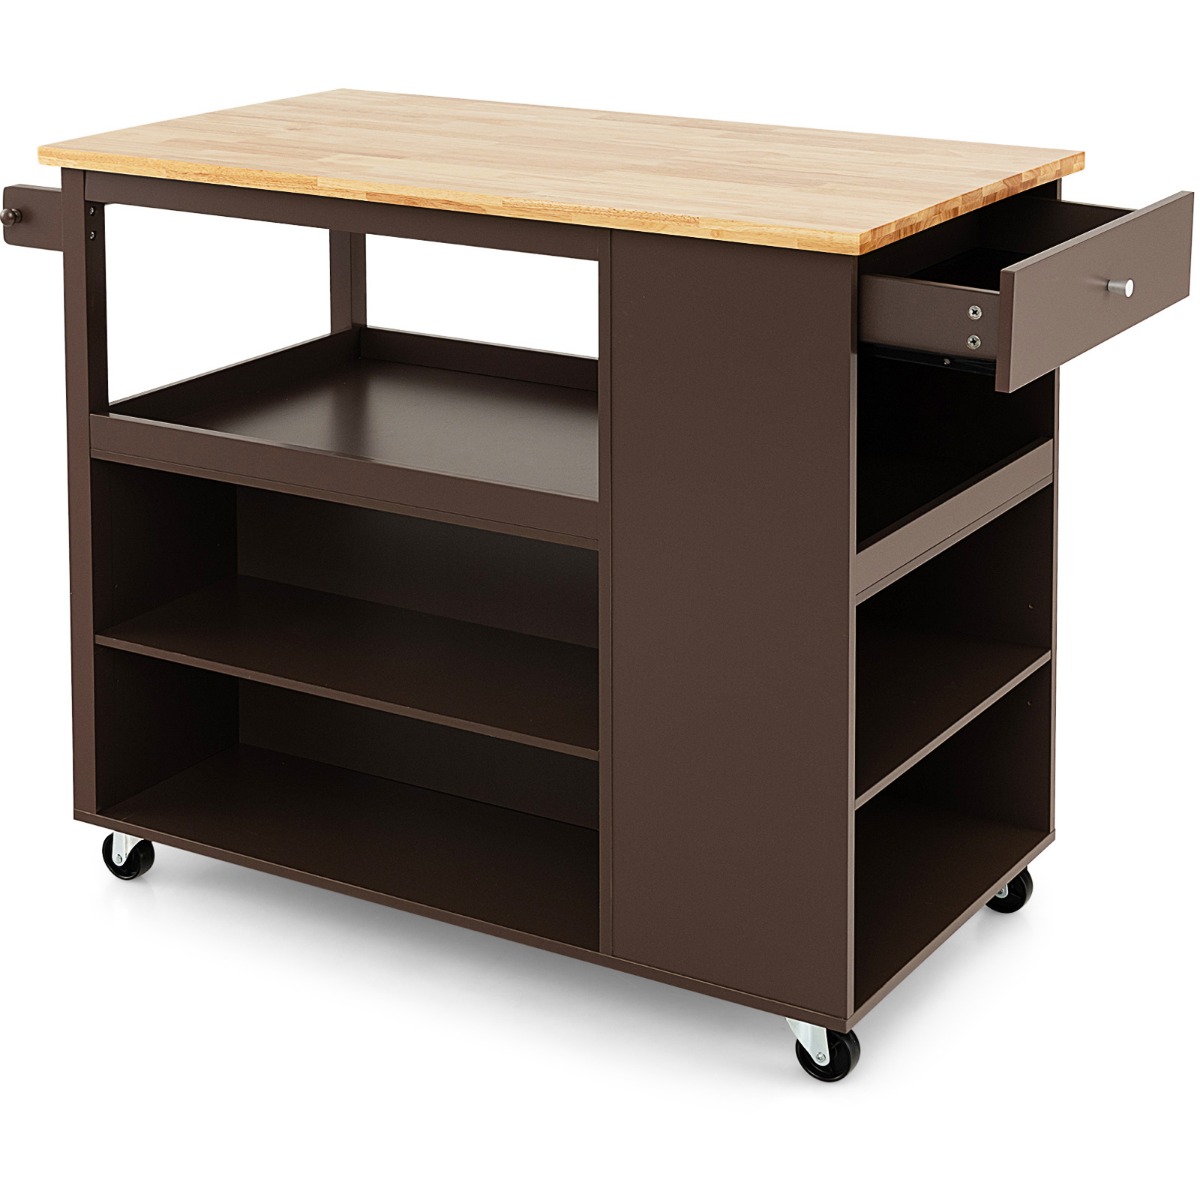 Mobile Serving Trolley Cart with Rubber Wood Top and Drawer-Brown